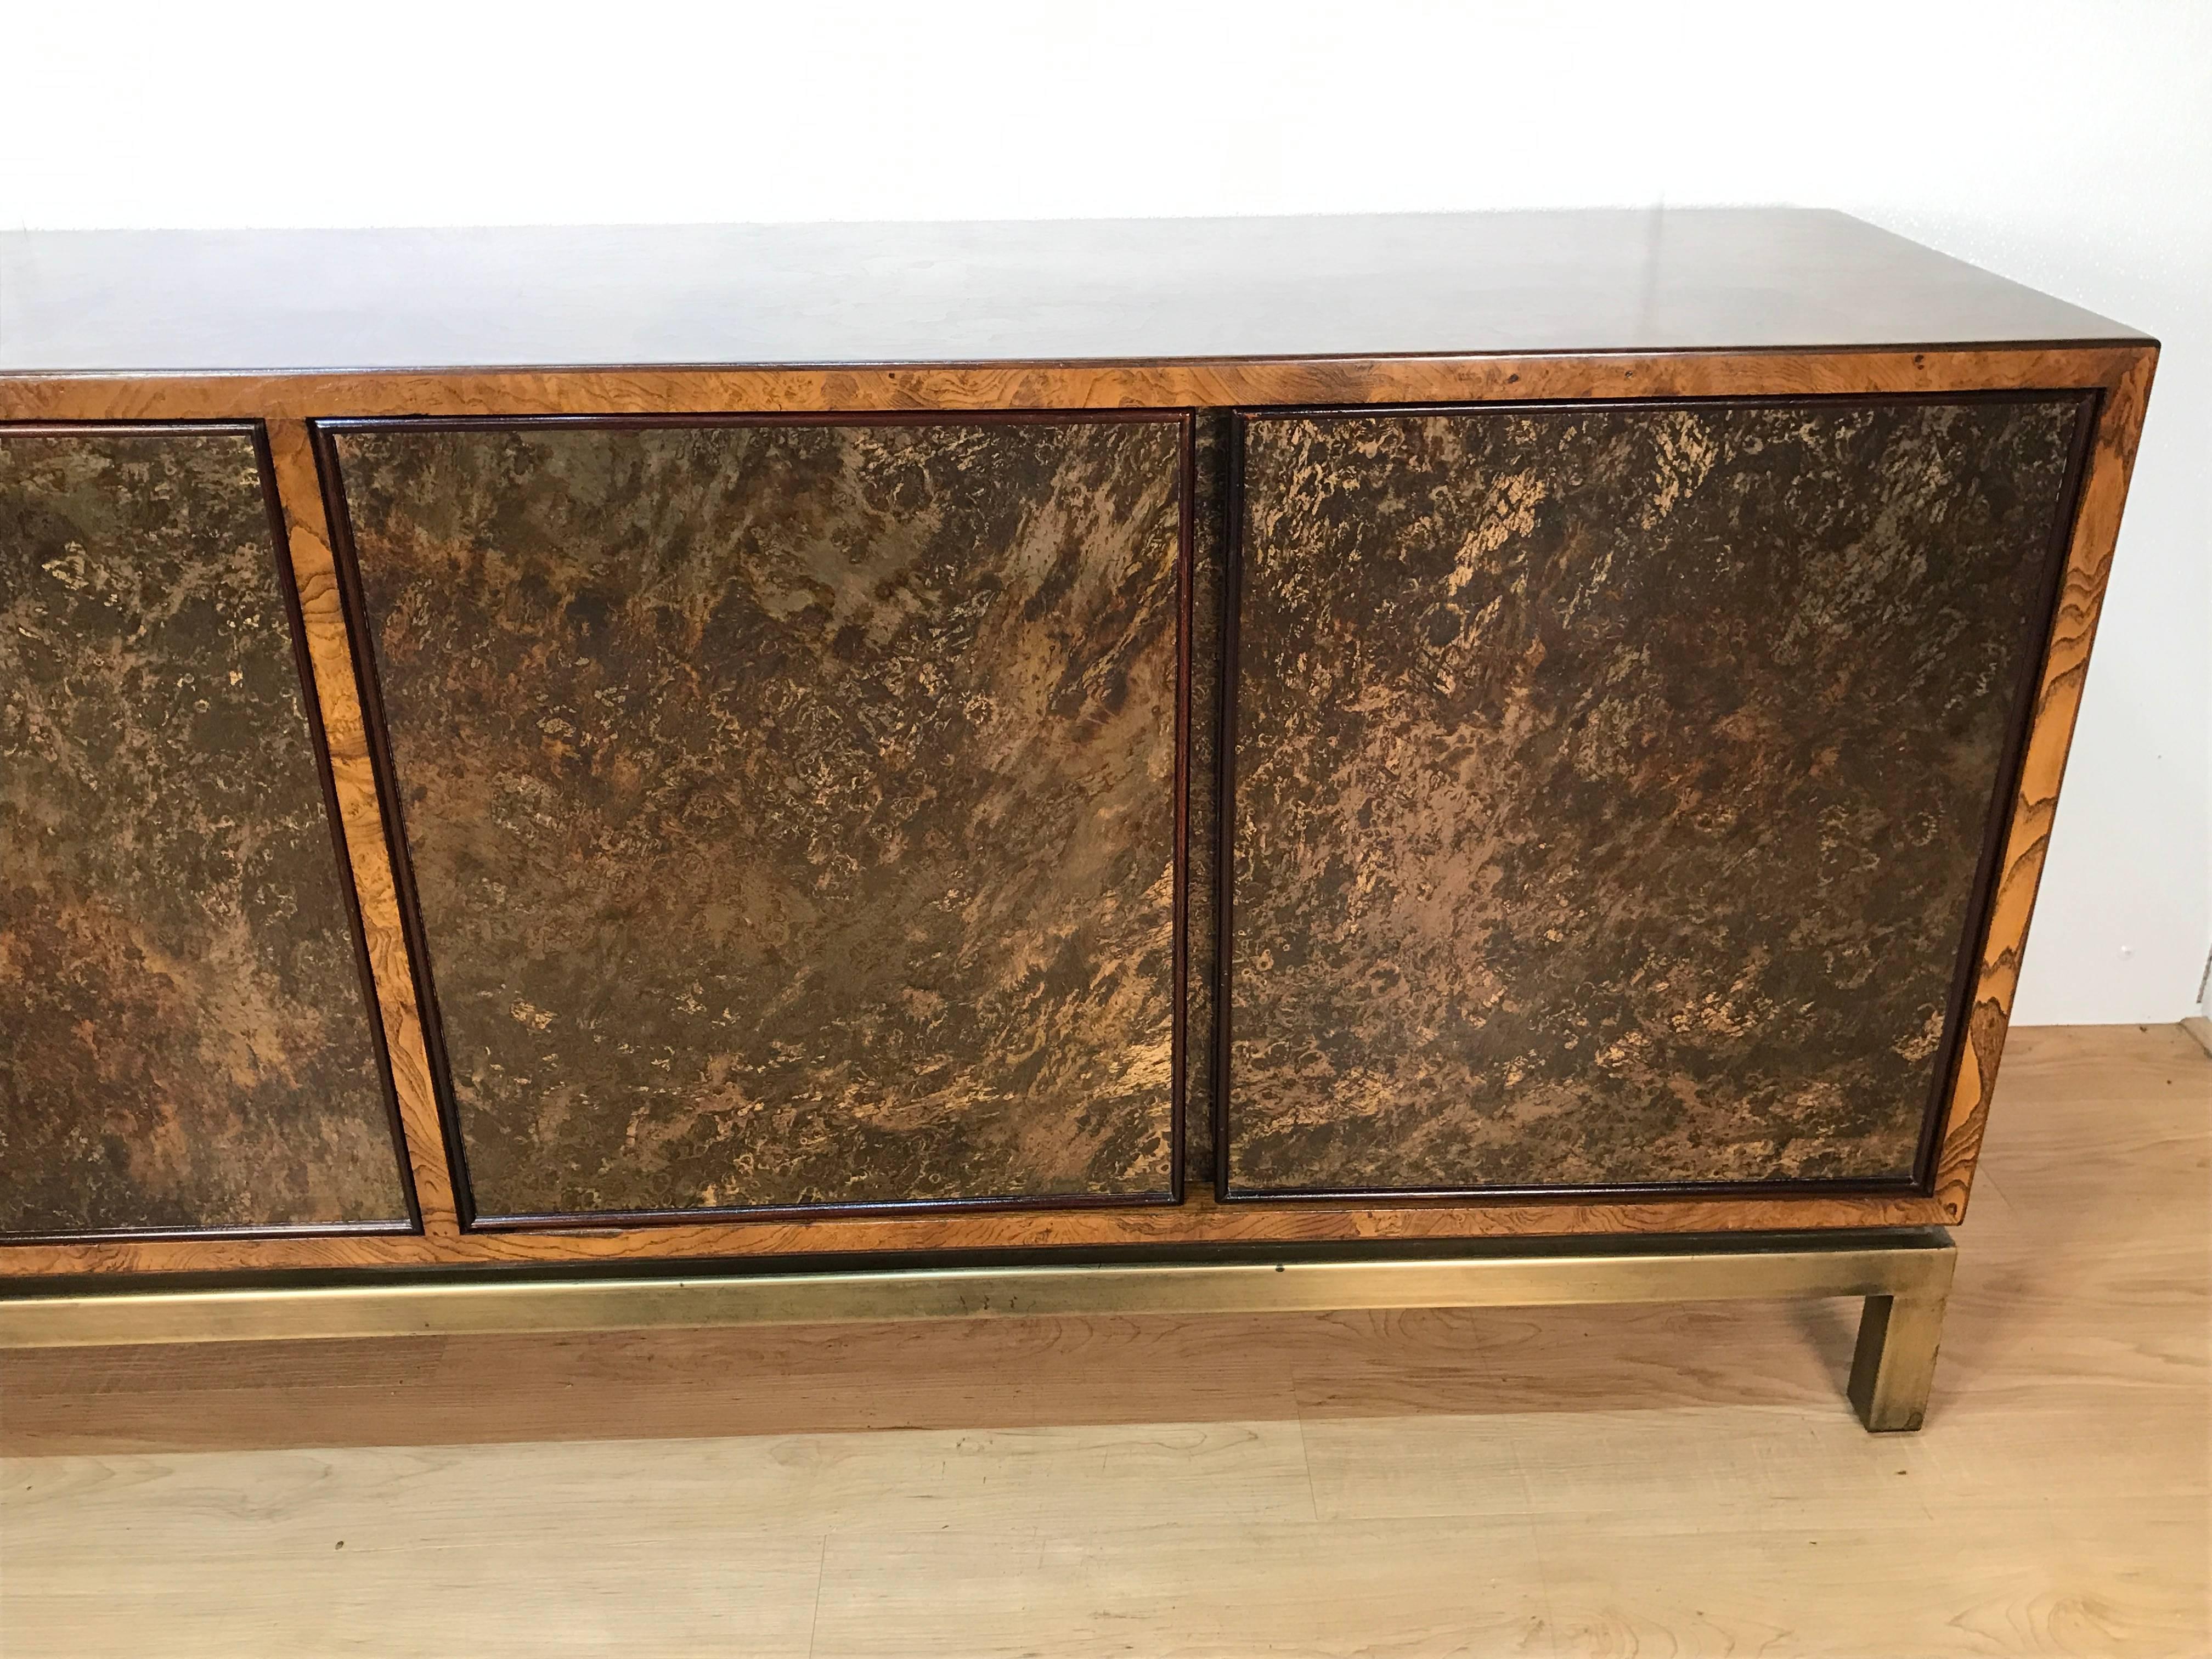 Patinated Stunning Acid Washed Bronze Sideboard by John Widdicomb For Sale